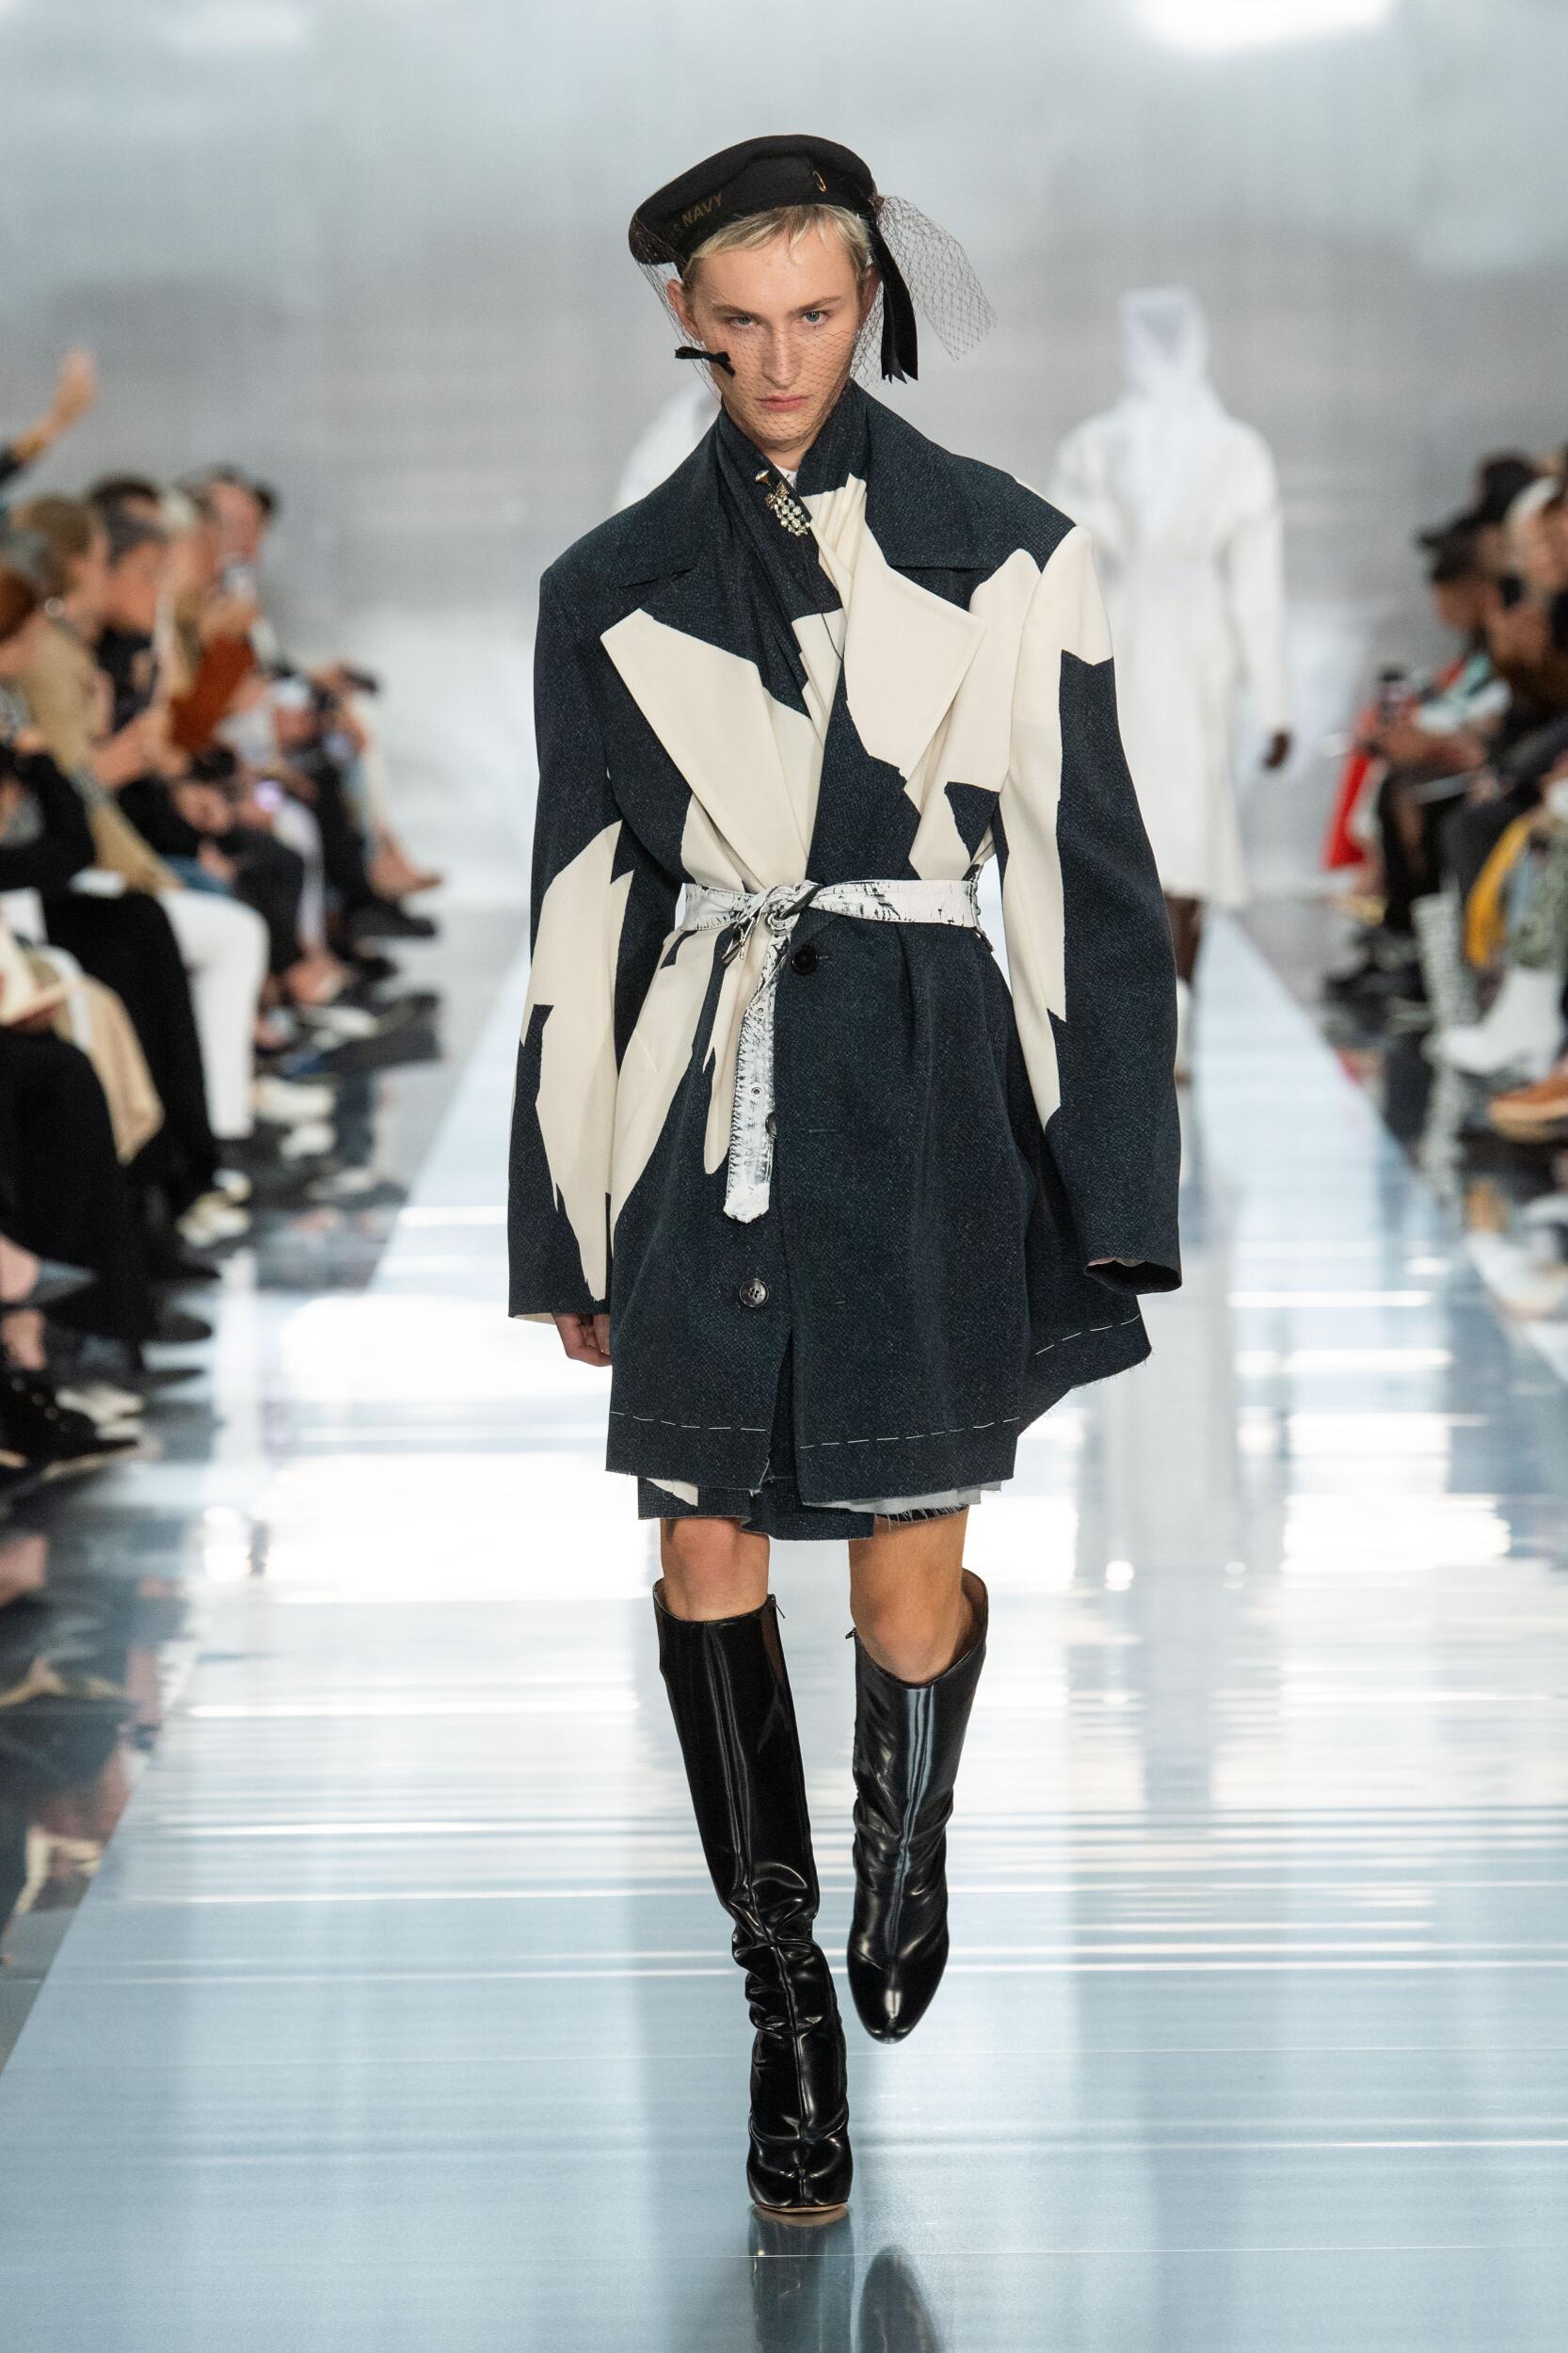 MAISON MARGIELA SPRING SUMMER 2020 COLLECTION | The Skinny ...